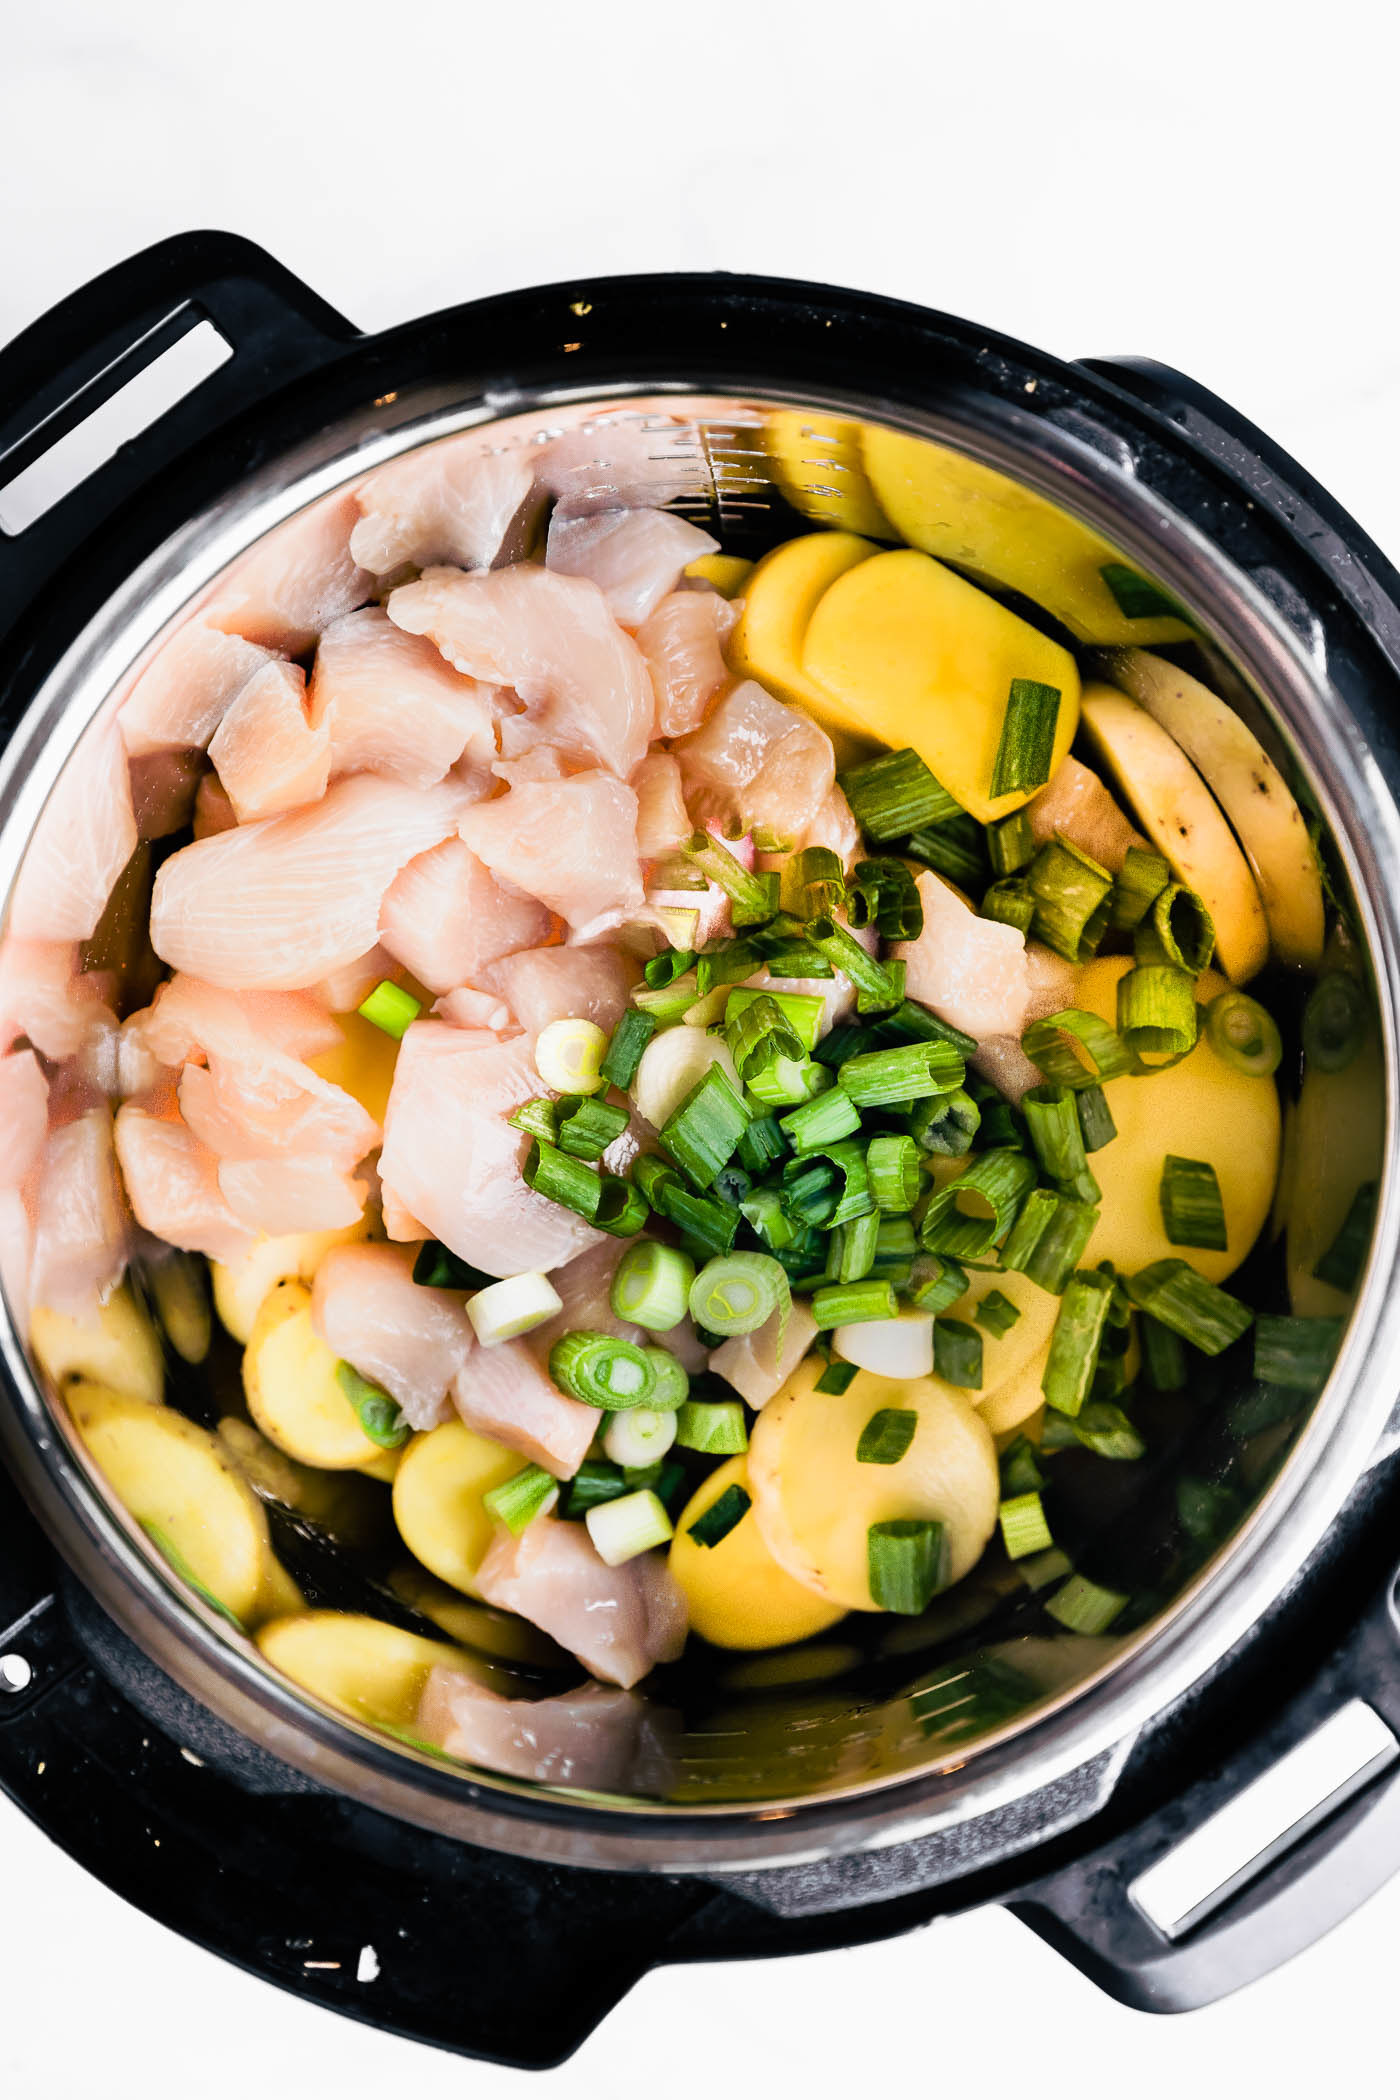 64 Instant Pot Recipes That Are Total Game Changers - 58